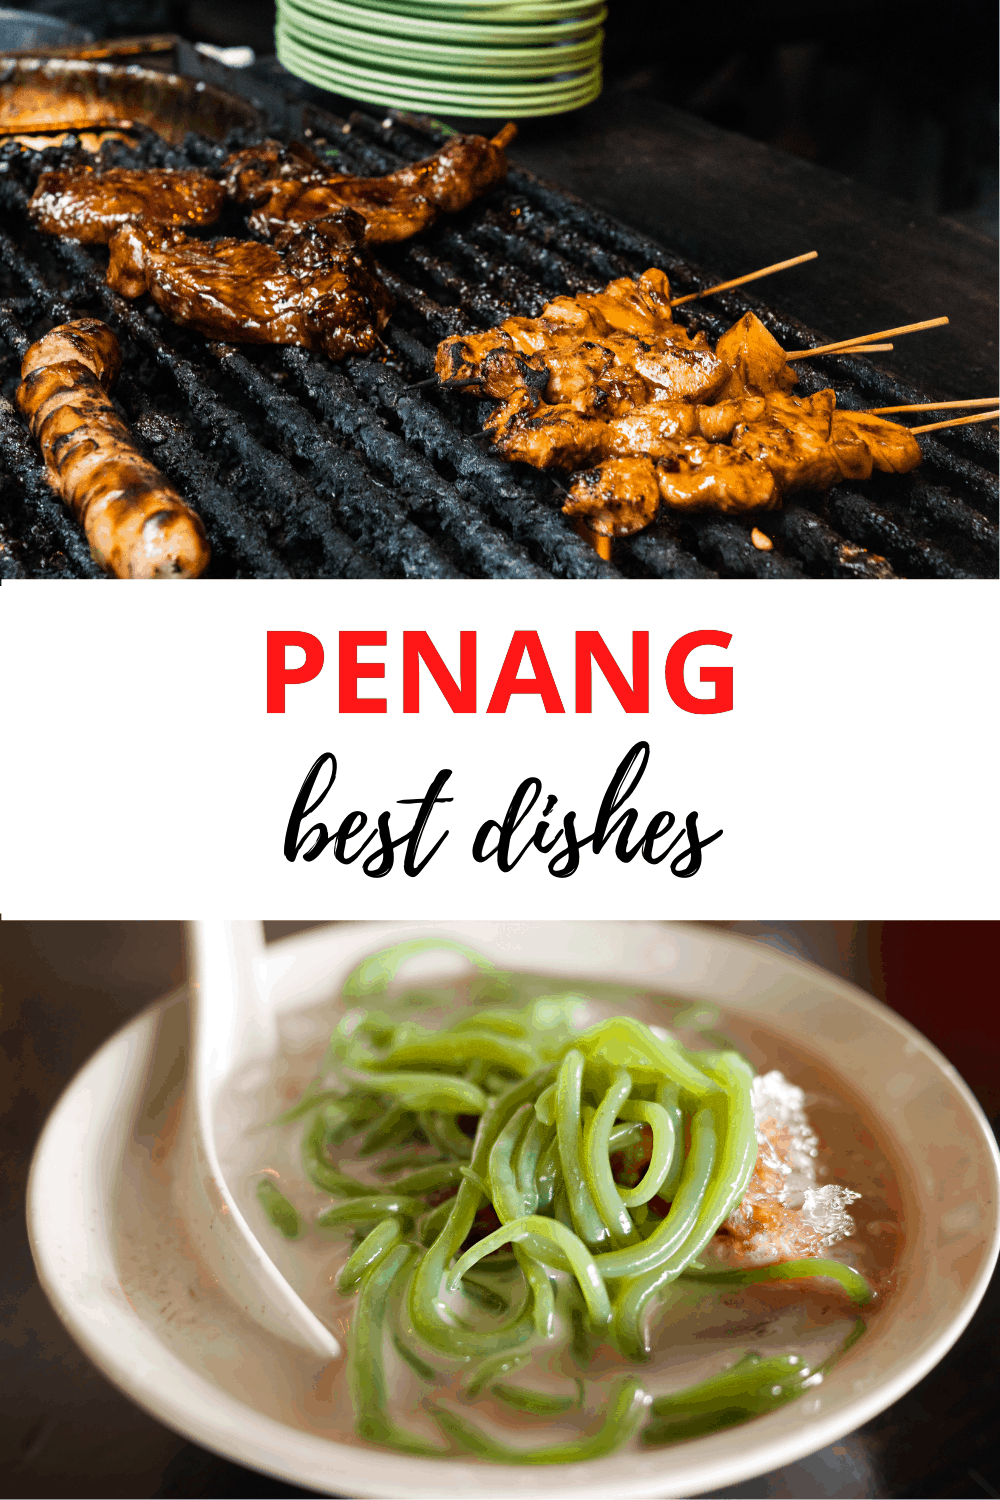 Top: Satay on a charcoal grill. Bottom: spoon in a bowl of cendol. Text overlay says "Penang best dishes"